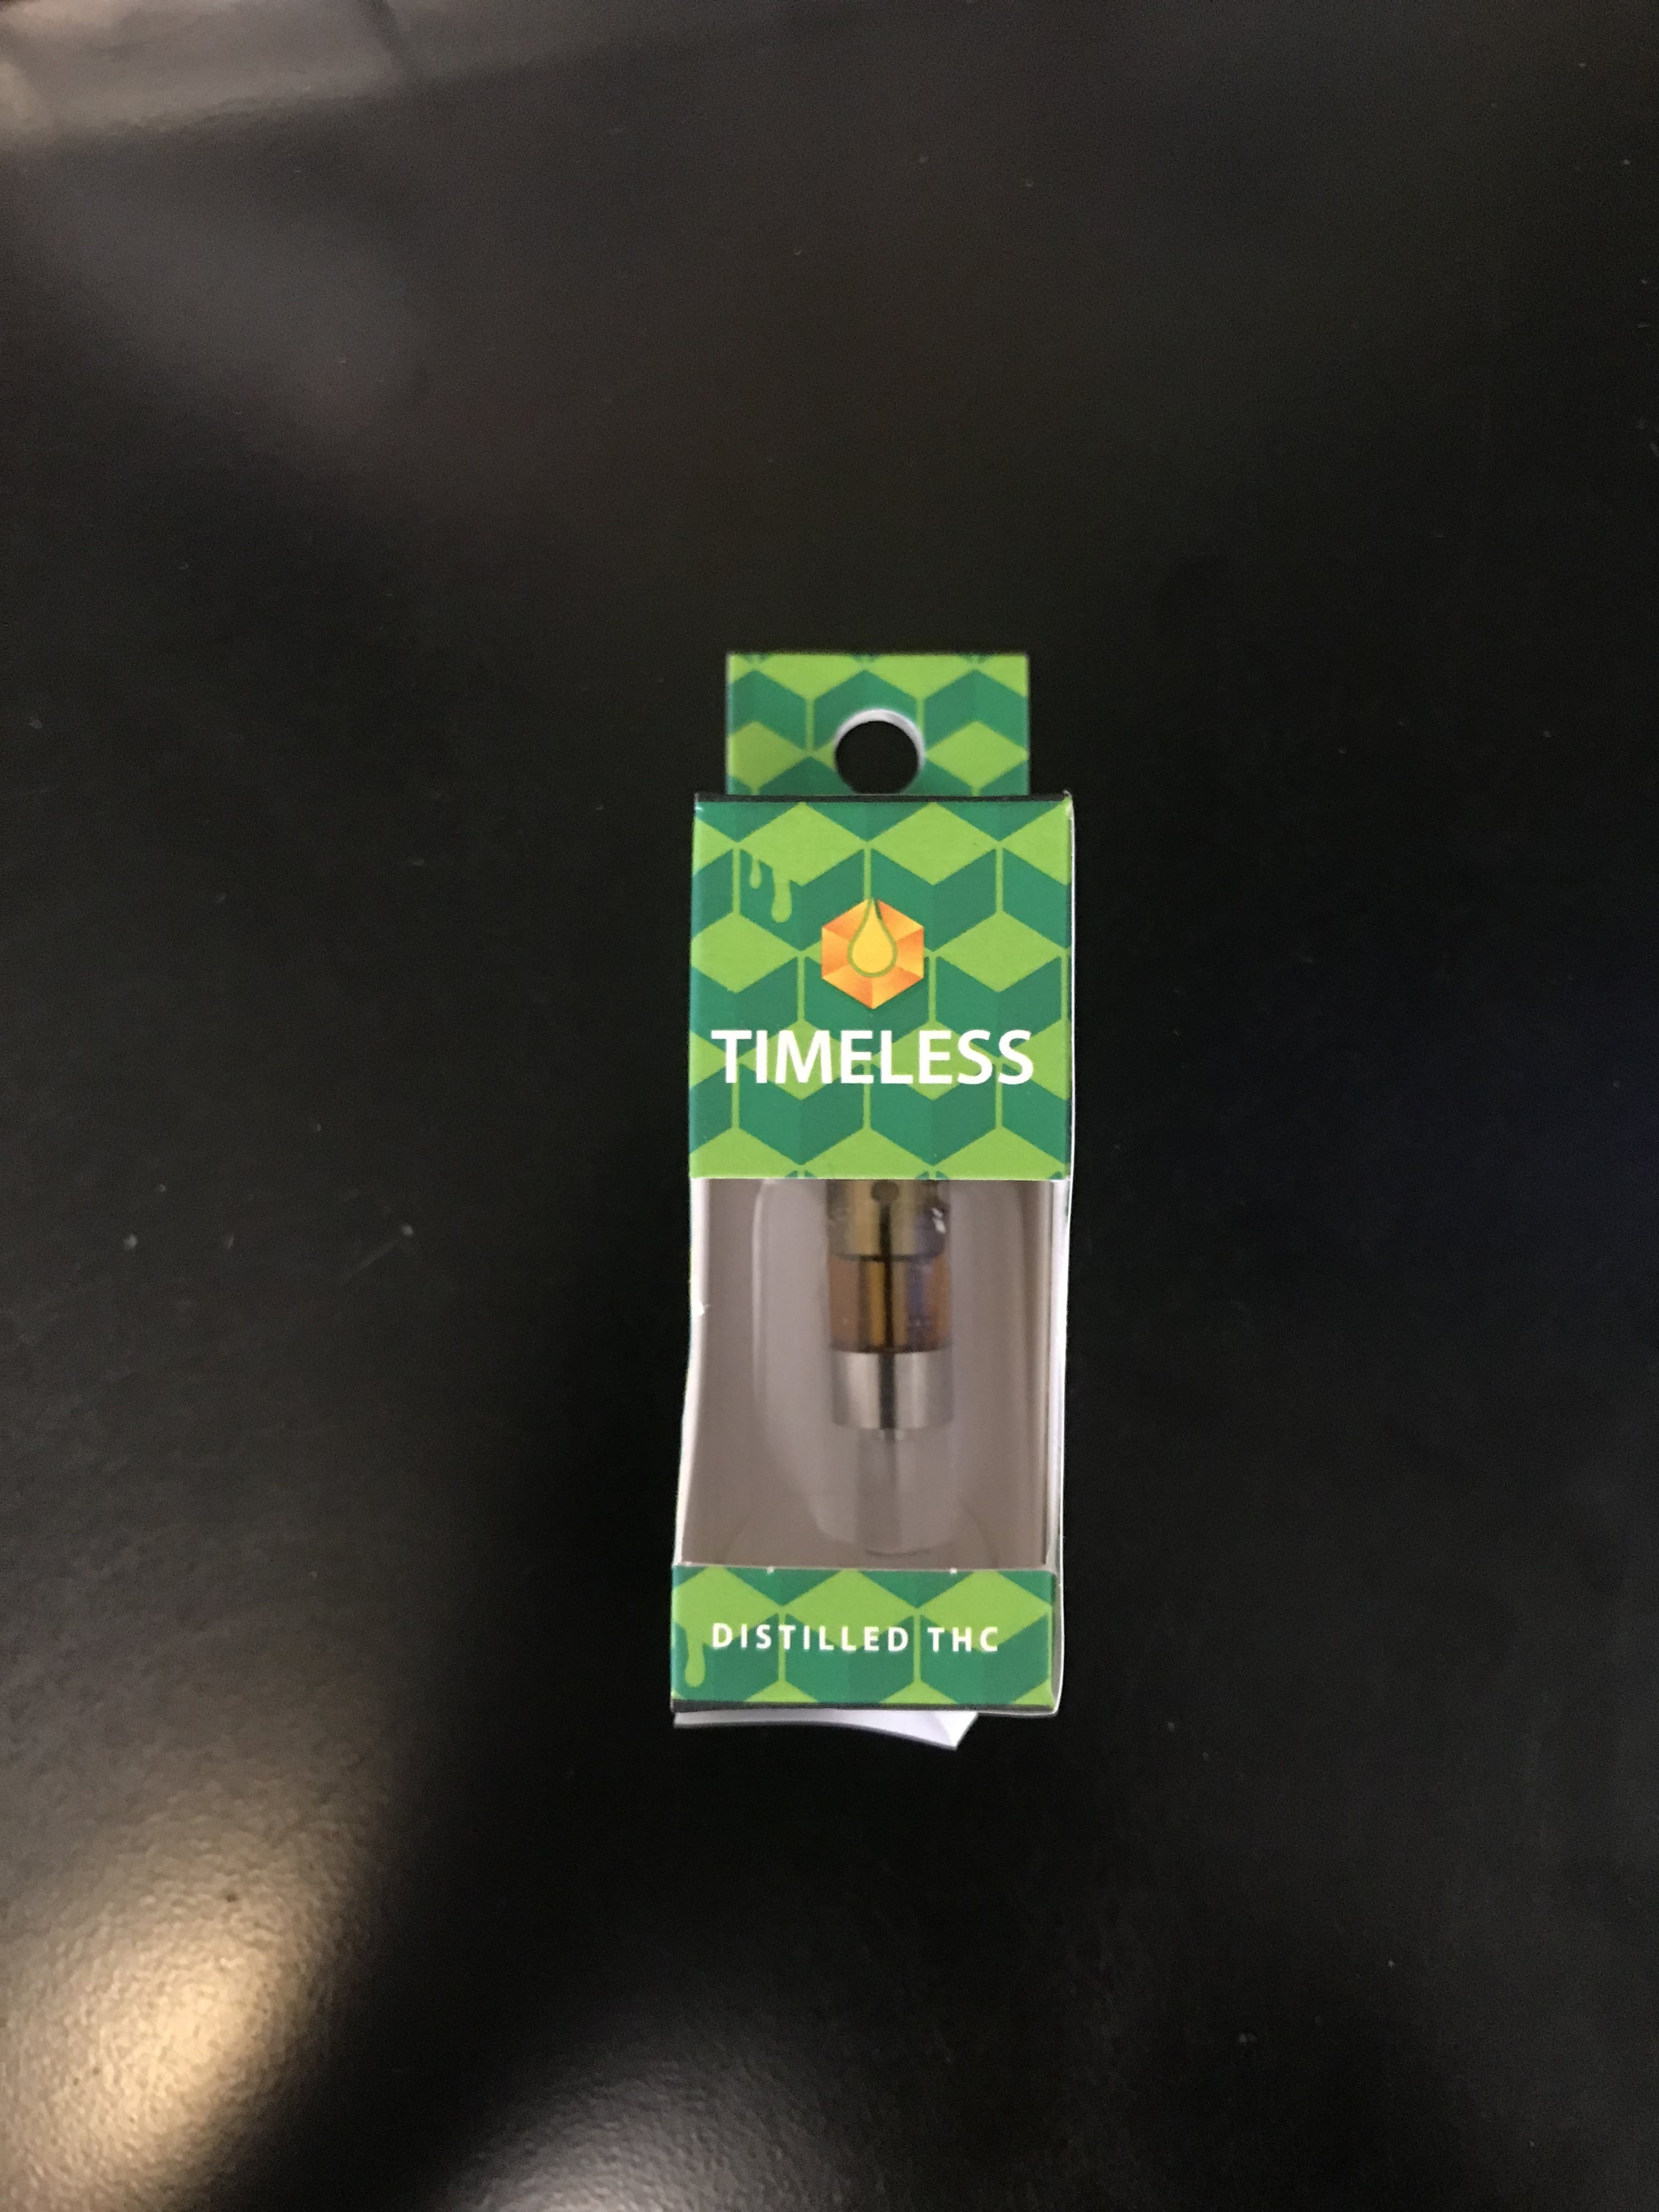 concentrate-timeless-sativa-2c-hybrid-2c-indica-cartridge-500mg